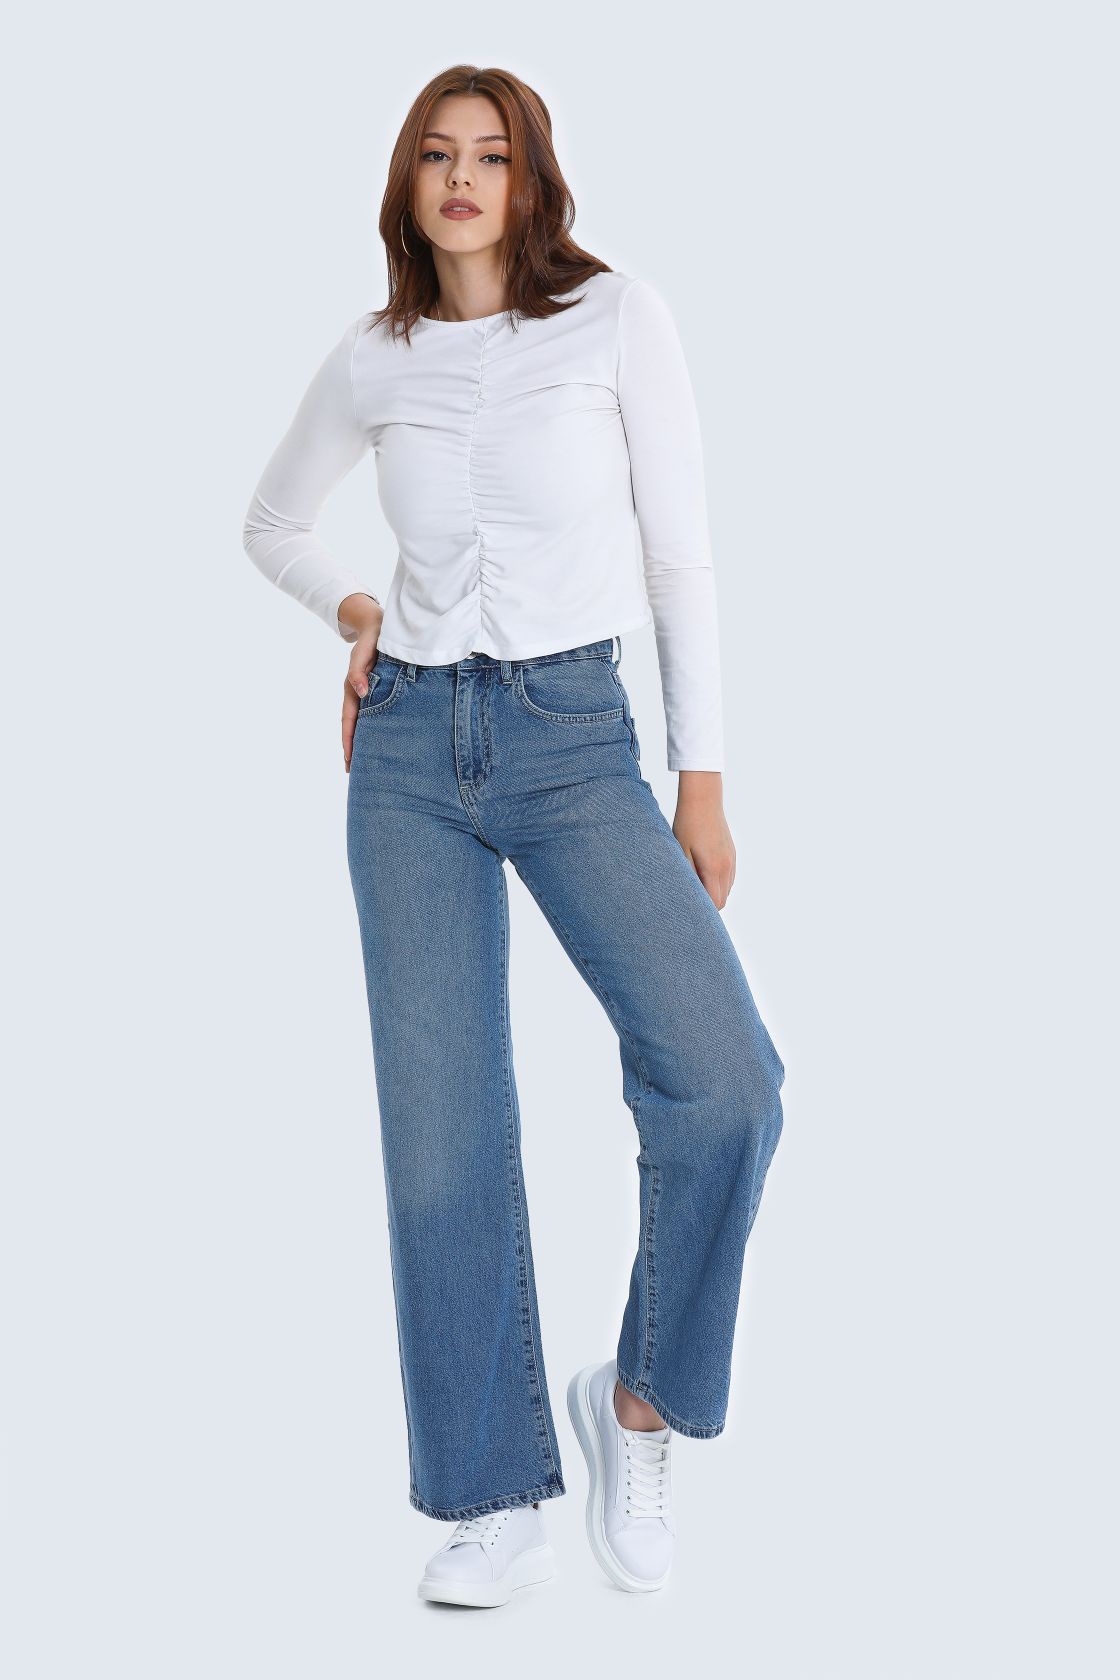 Are the Light Blue Hourglass Wide Leg Jeans perfect for Spring wardrobe?